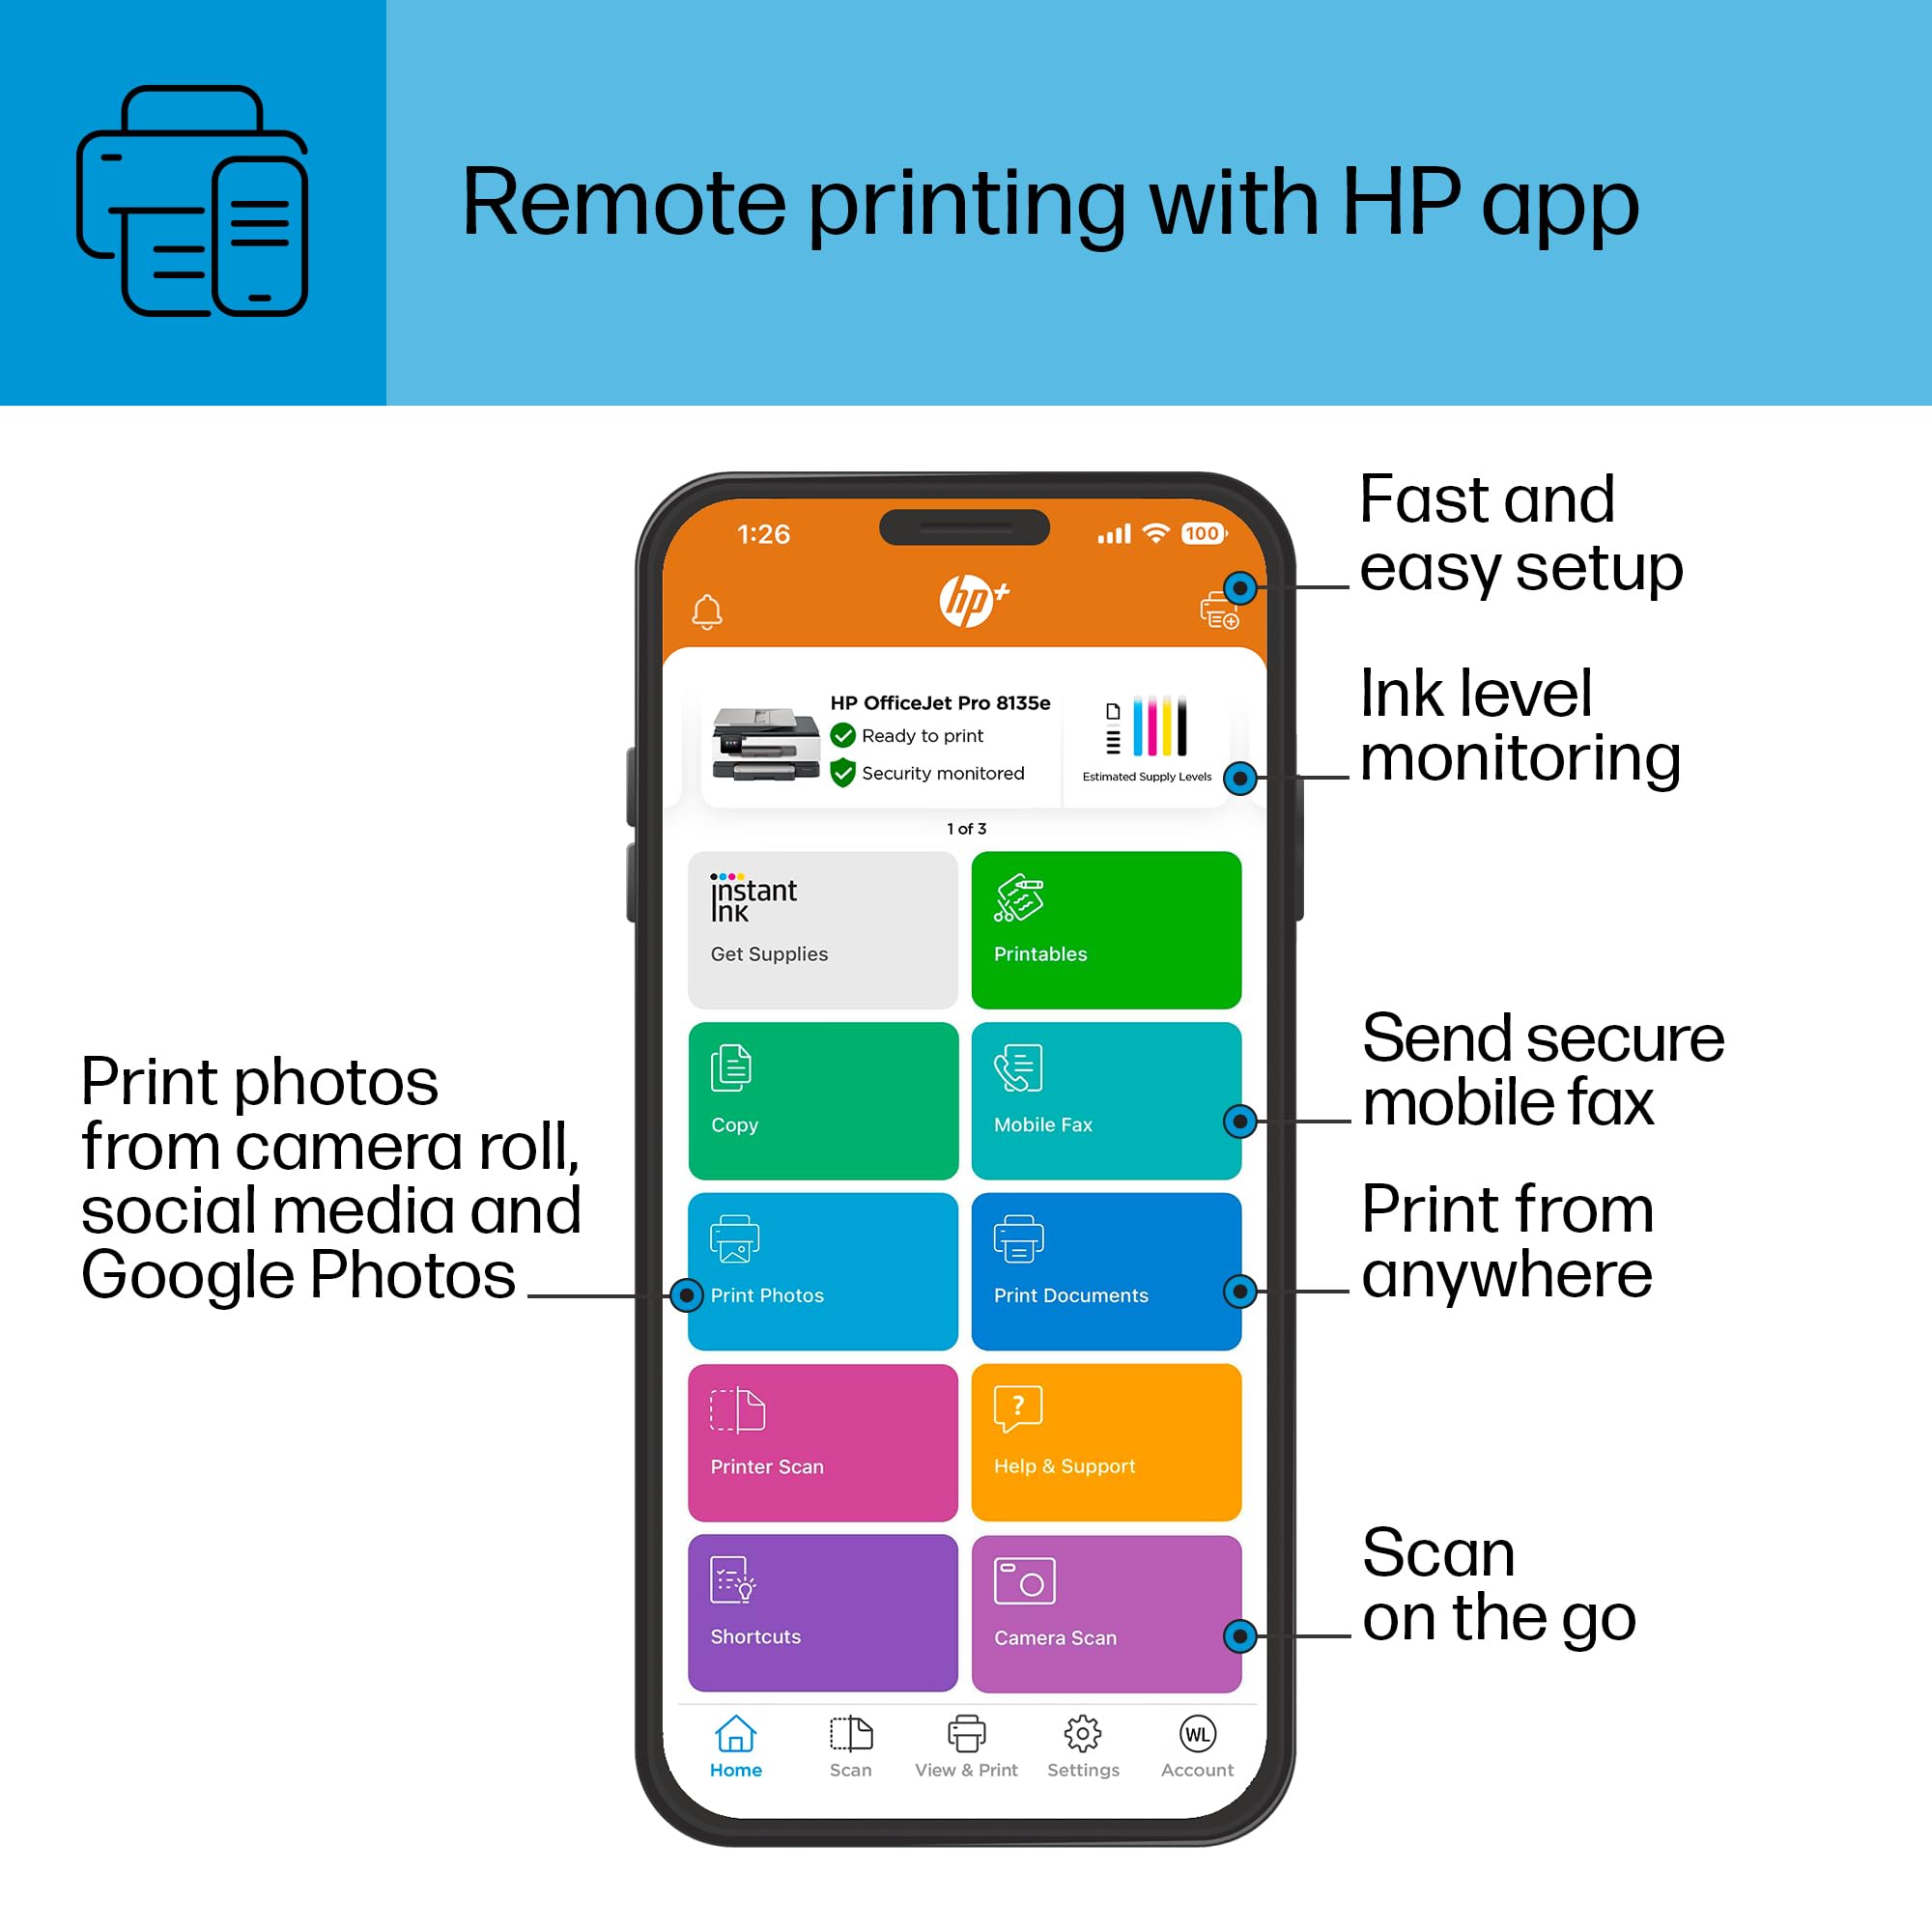 HP OfficeJet Pro 8135e Wireless All-in-One Color Inkjet Printer, Print, scan, Copy, fax, ADF, Duplex Printing Best for Home Office, 3 Months of Ink Included (40Q35A)